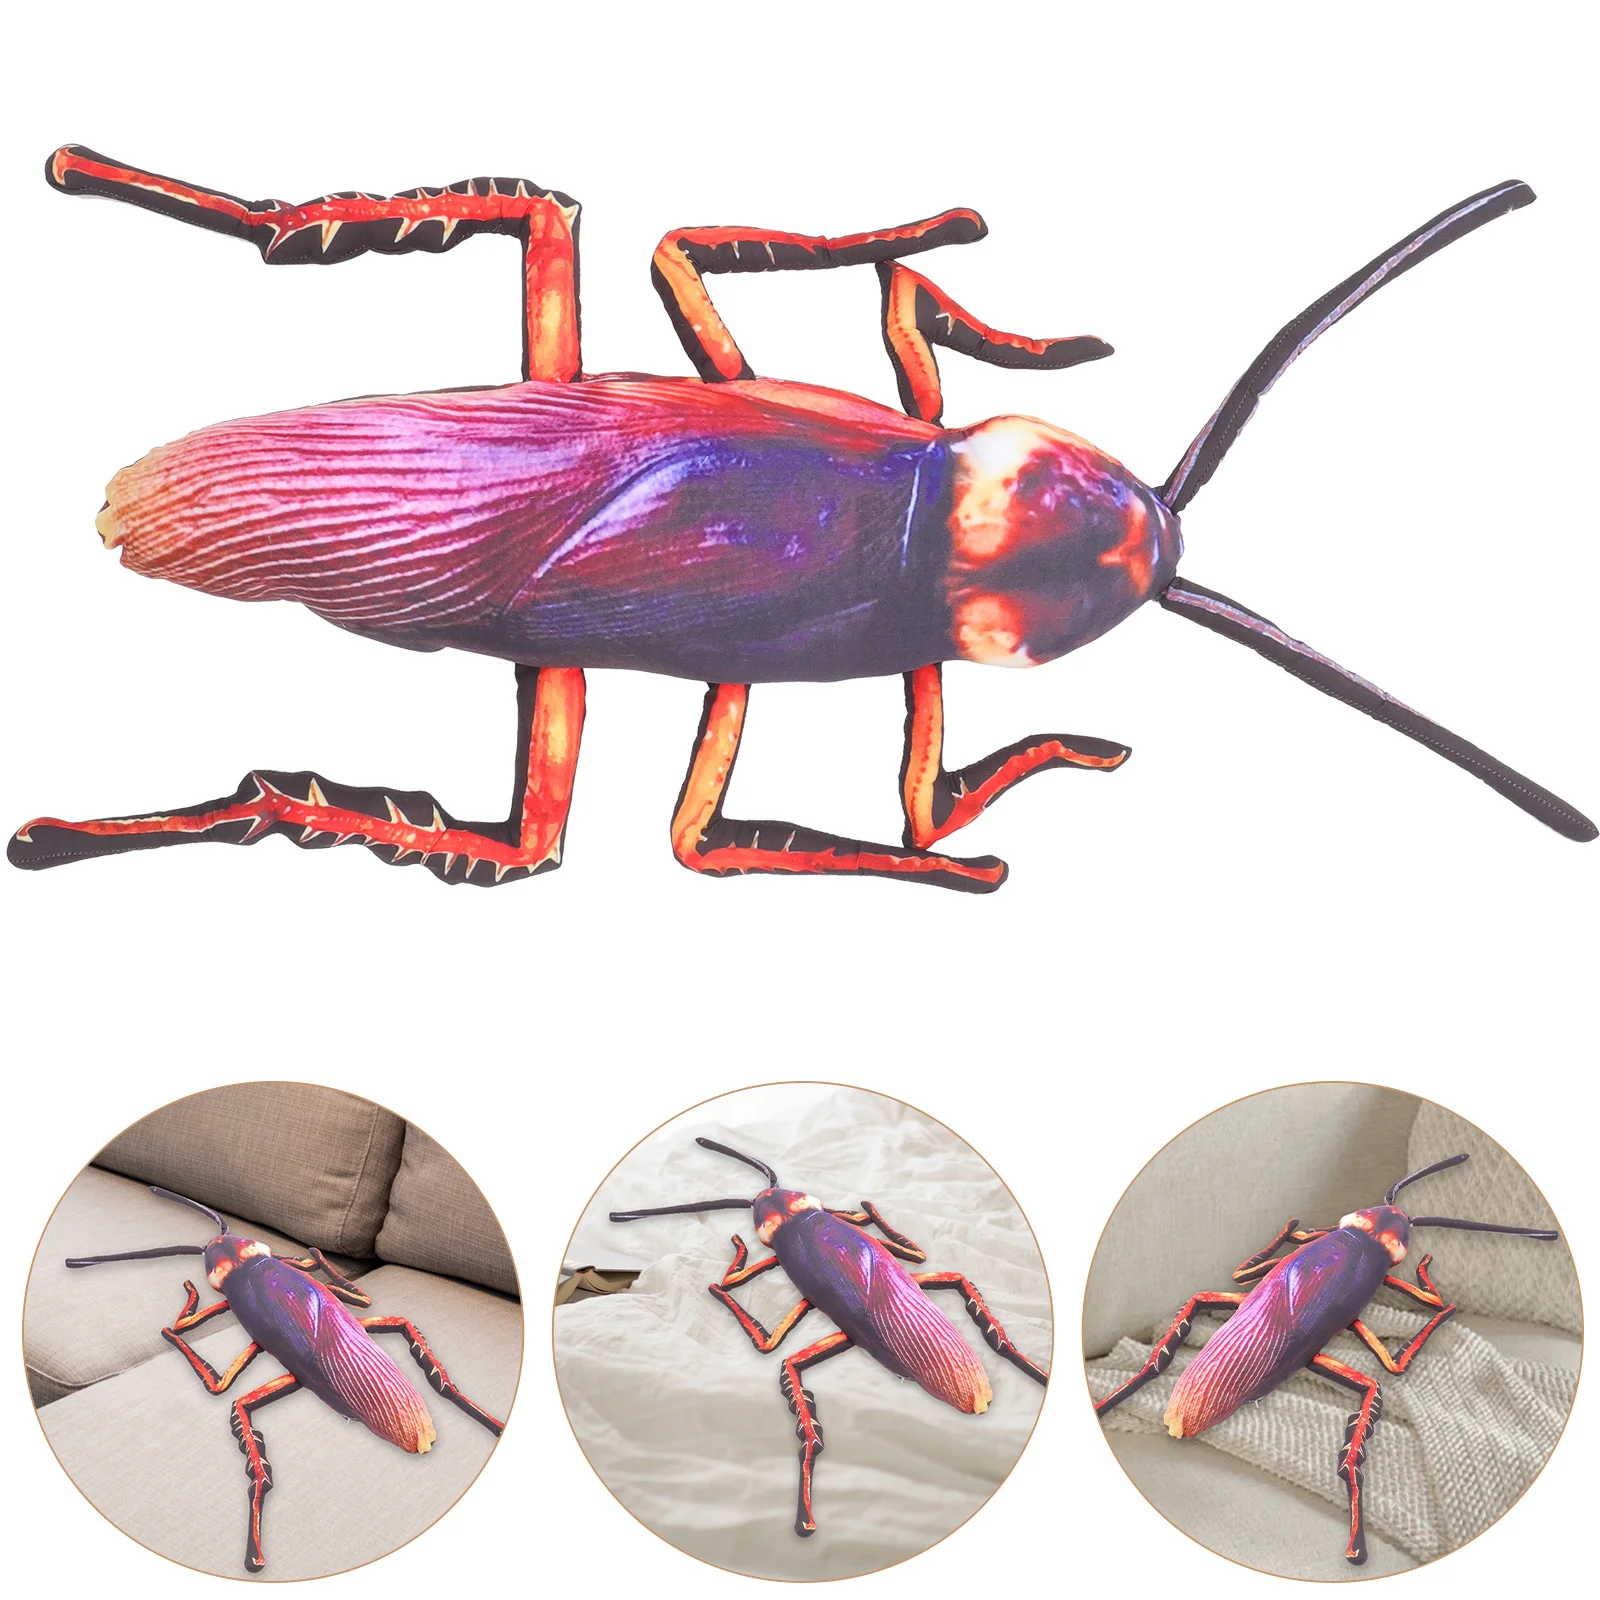 

Cockroach Prank Toy Prop Toys Kids Soft Props Funny Plush Simulated Models Cognitive Child